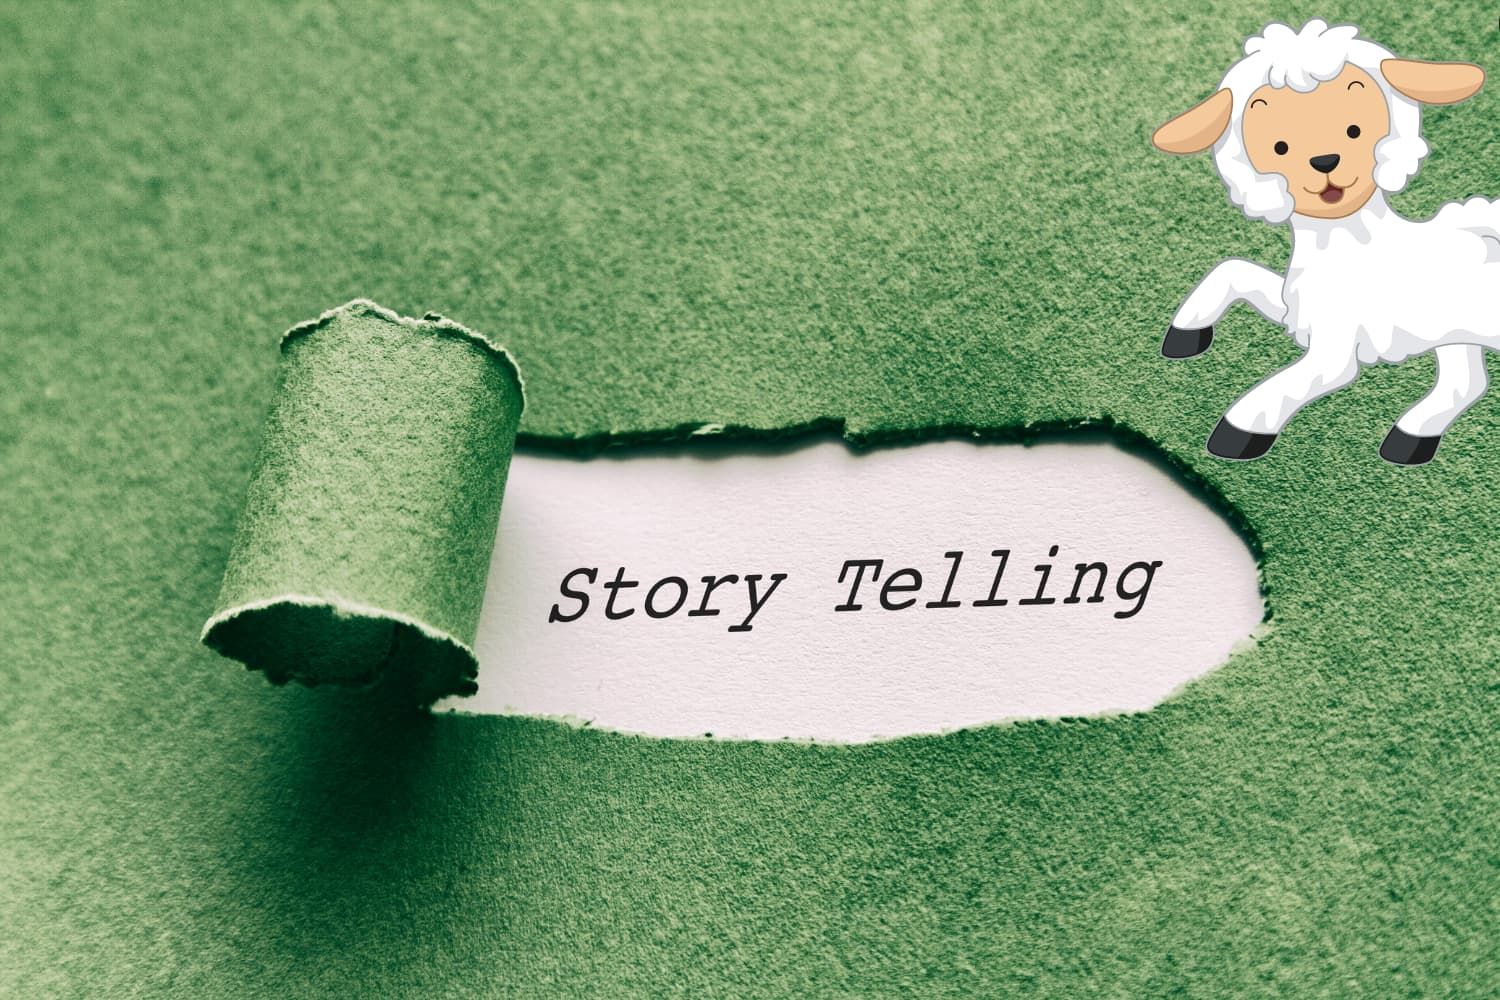 Storytelling%20tips%20-%20NT%20Parable%20of%20the%20lost%20sheep%20-%20Four%20tips%20to%20help%20you%20tell%20the%20story-0b70d295 Jesus - His teaching